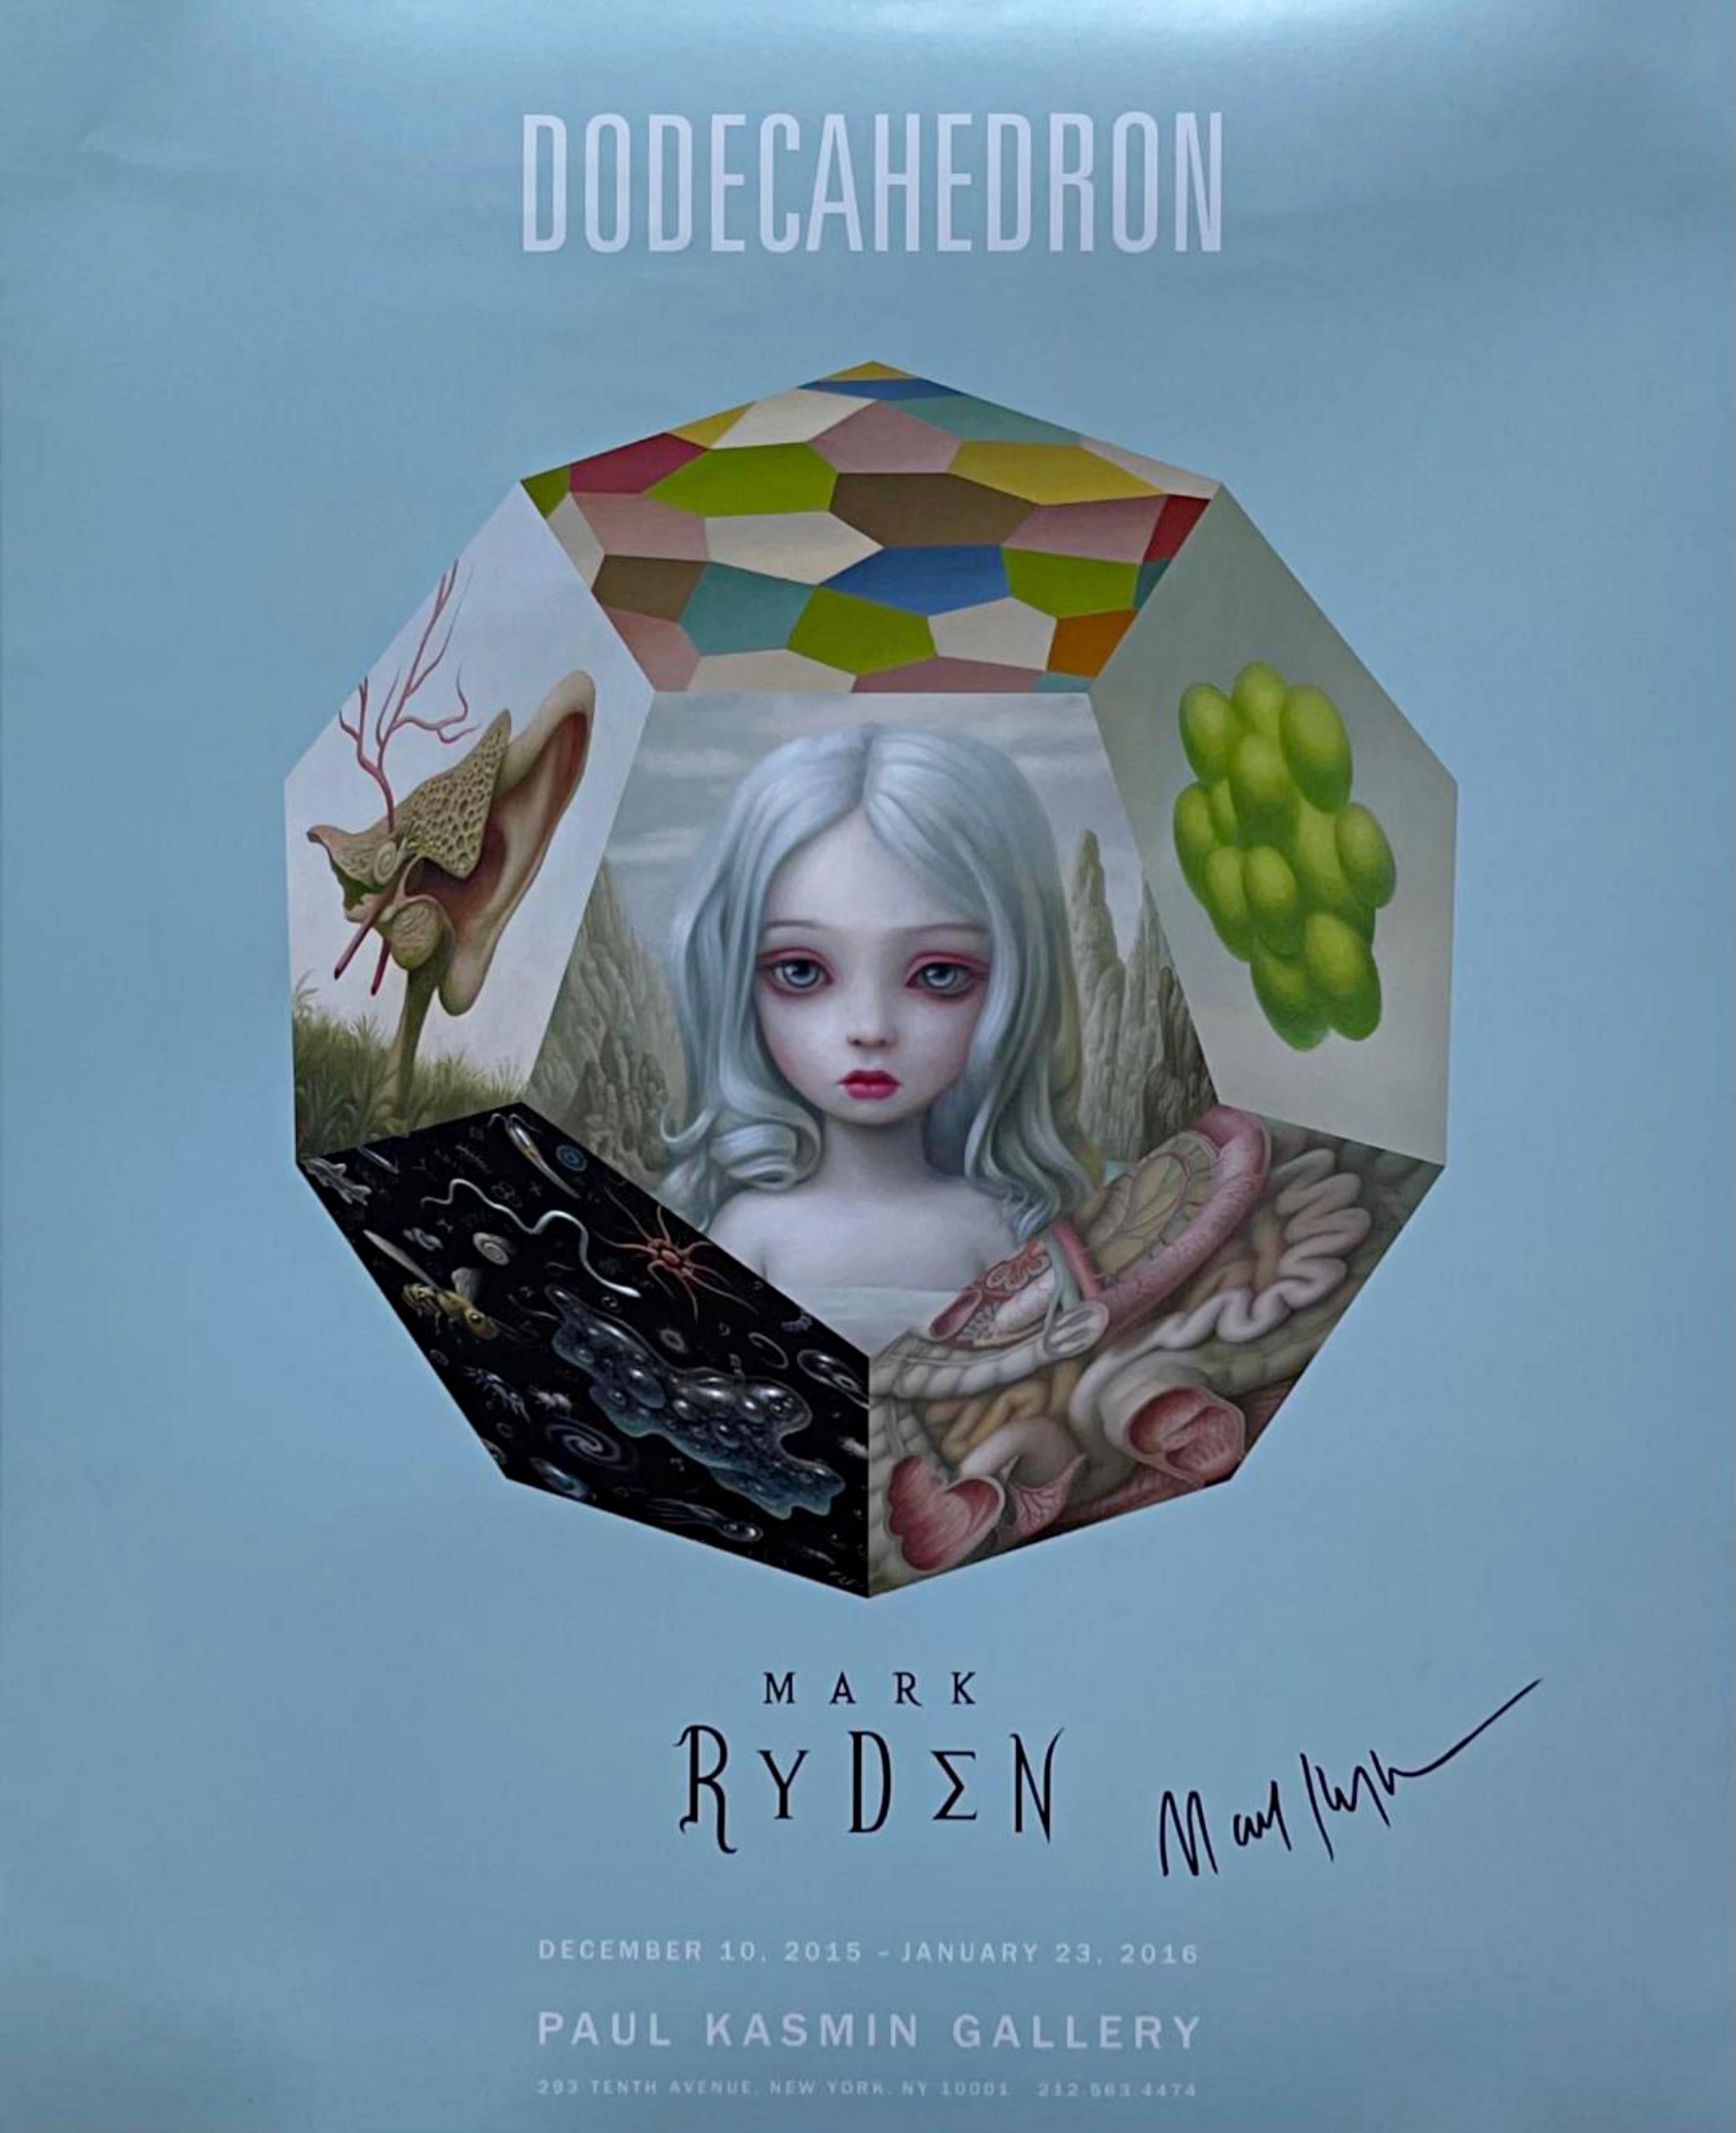 Mark Ryden
Dodecahedron (Hand Signed by Mark Ryden), 2015
Offset Lithograph poster (hand signed by Mark Ryden)
Hand signed by artist on lower right front for the present owner.
20 × 16 inches
Unframed
This Mark Ryden offset lithograph poster was